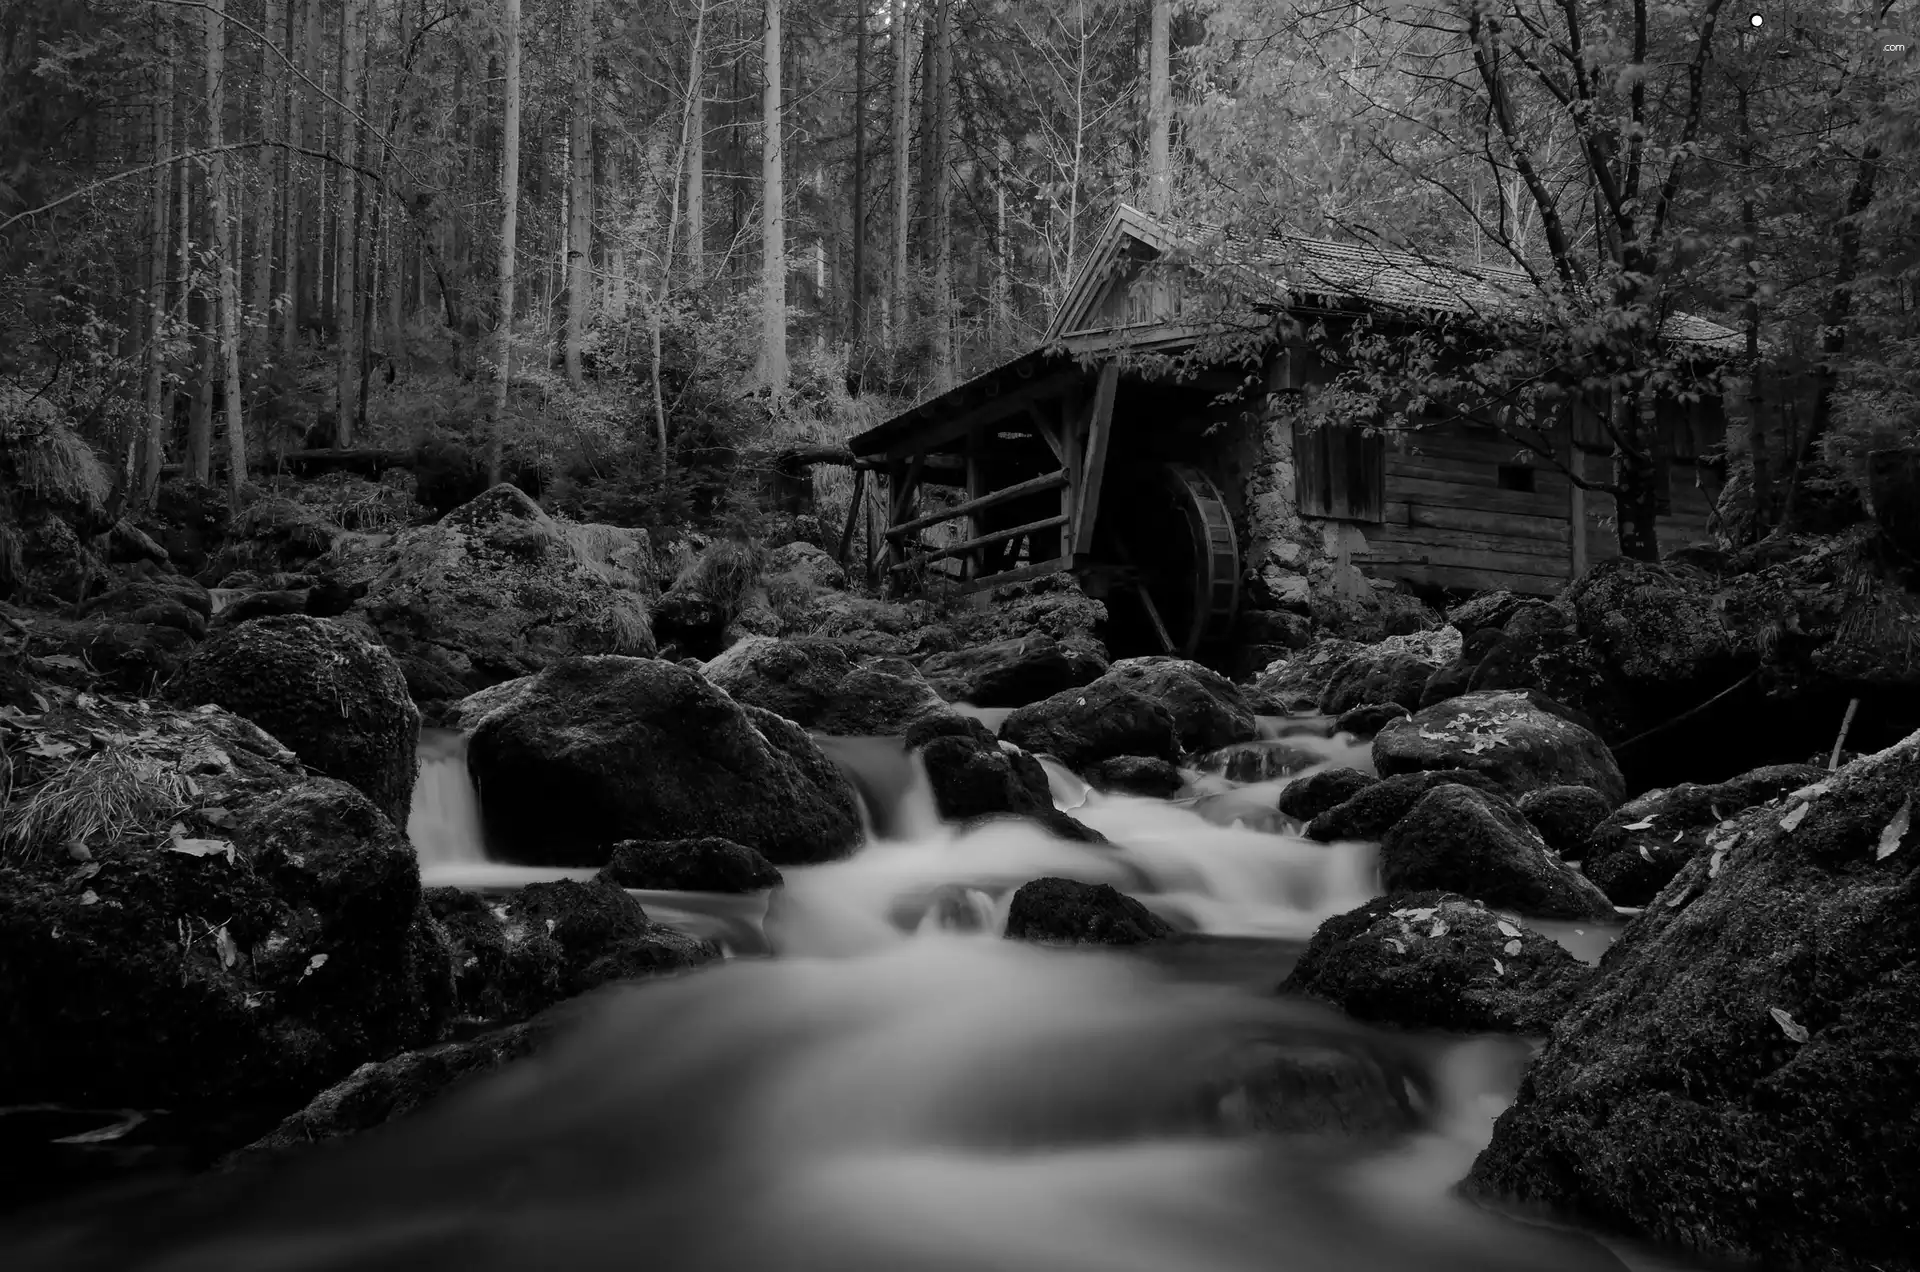 Watermill, Stones, forest, River